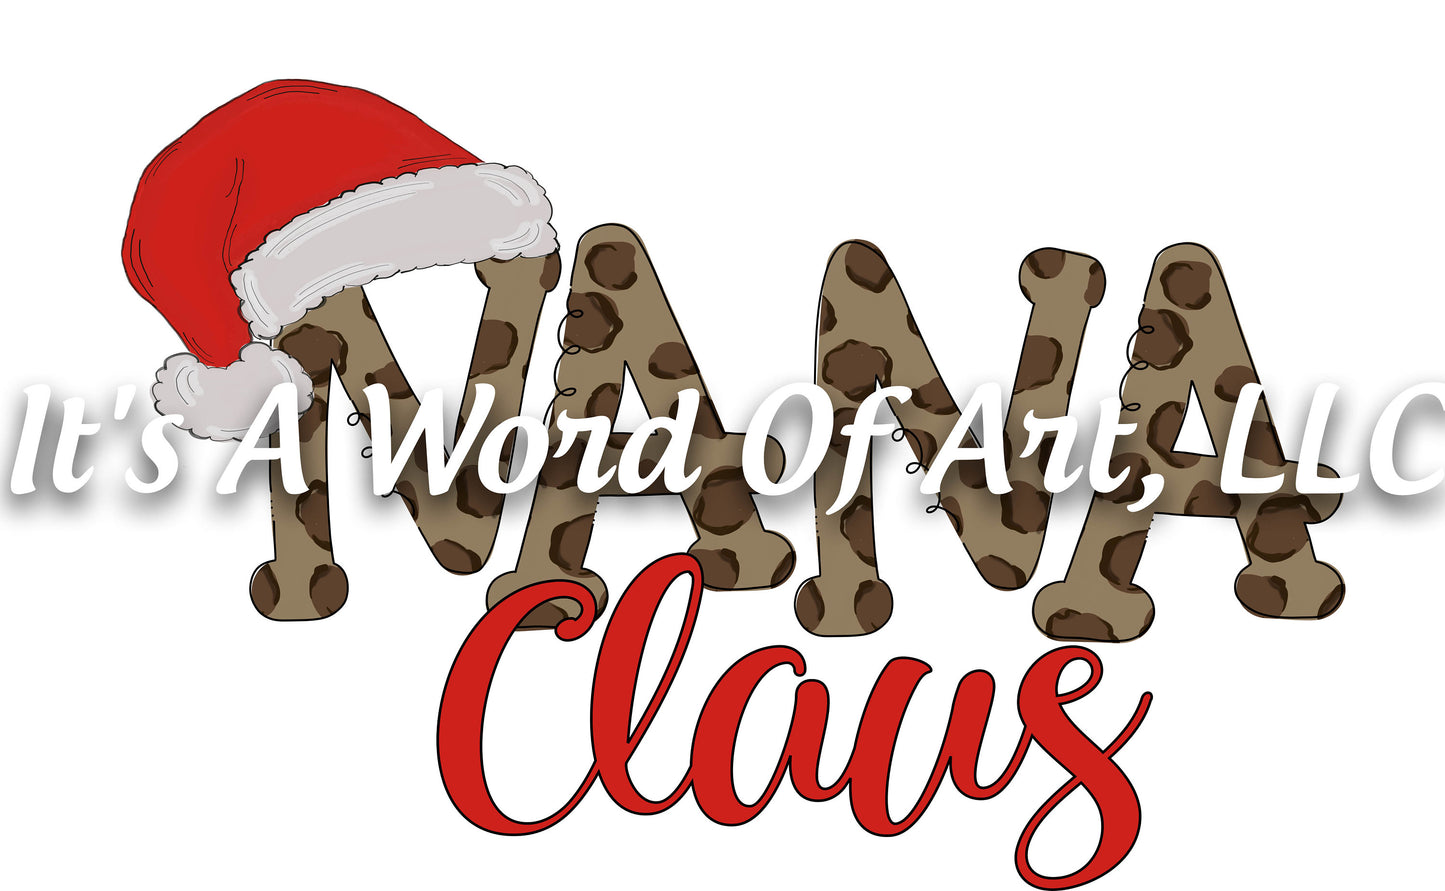 Christmas 295 - Nana Claus Cheetah Letters - Sublimation Transfer Set/Ready To Press Sublimation Transfer/Sublimation Transfer